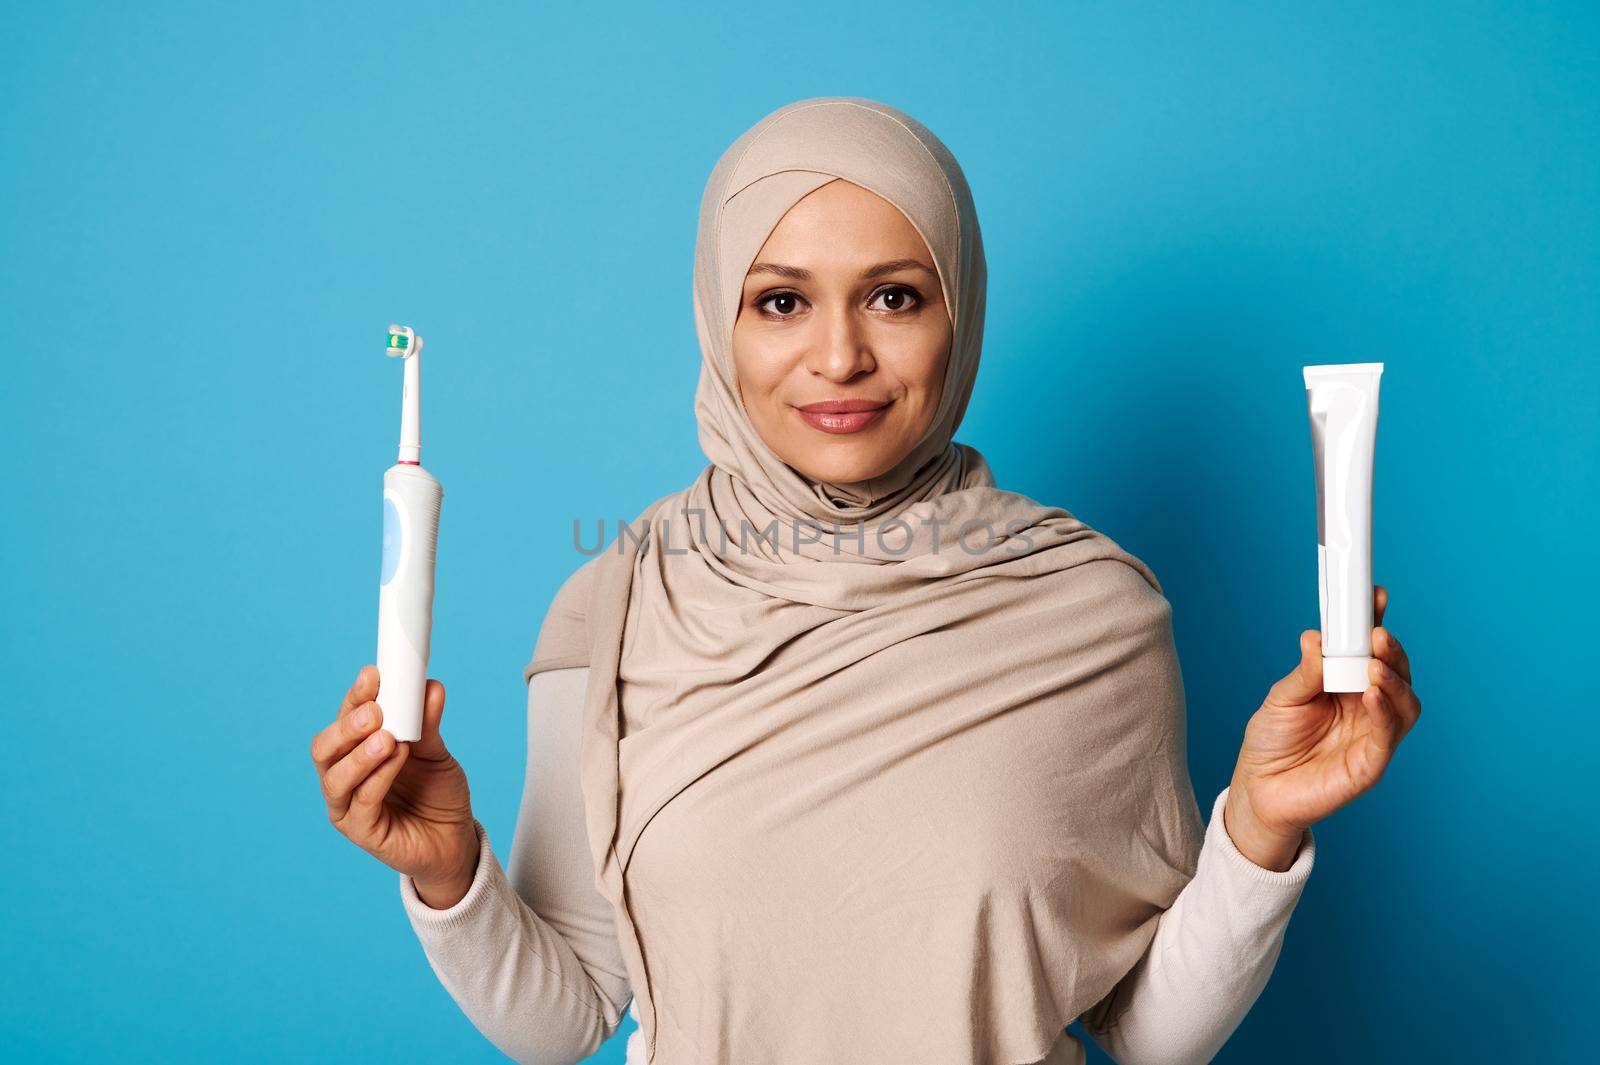 Beautiful woman with oriental appearance wearing a hijab, holding a toothpaste and toothbrush and posing looking at camera over blue background